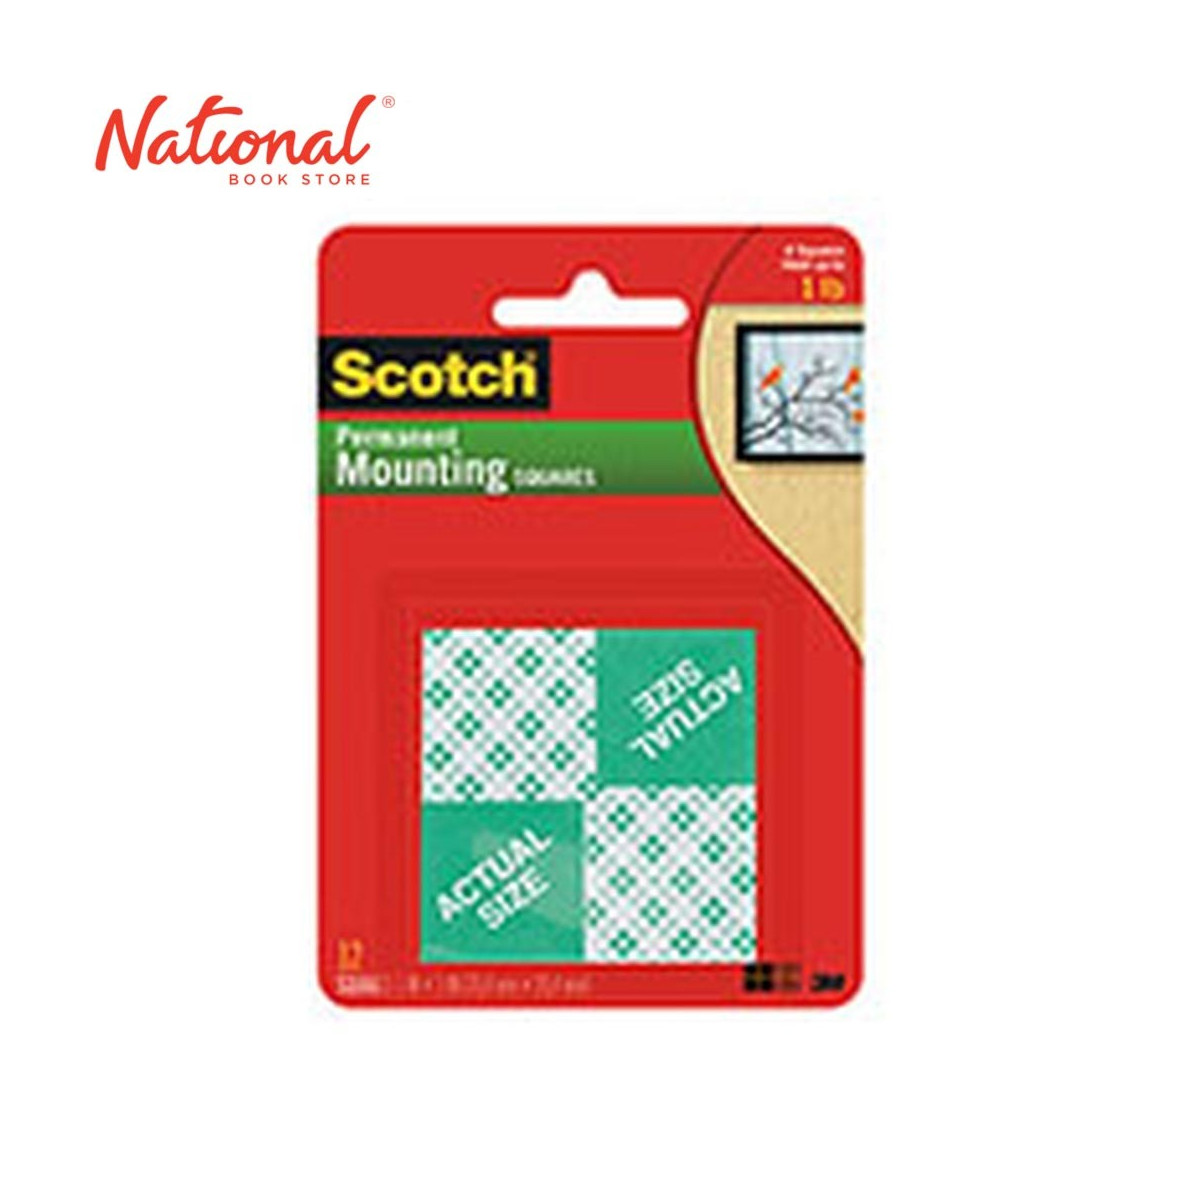 SCOTCH DOUBLE-SIDED TAPE MOUNT 110D SQUARE 1X1